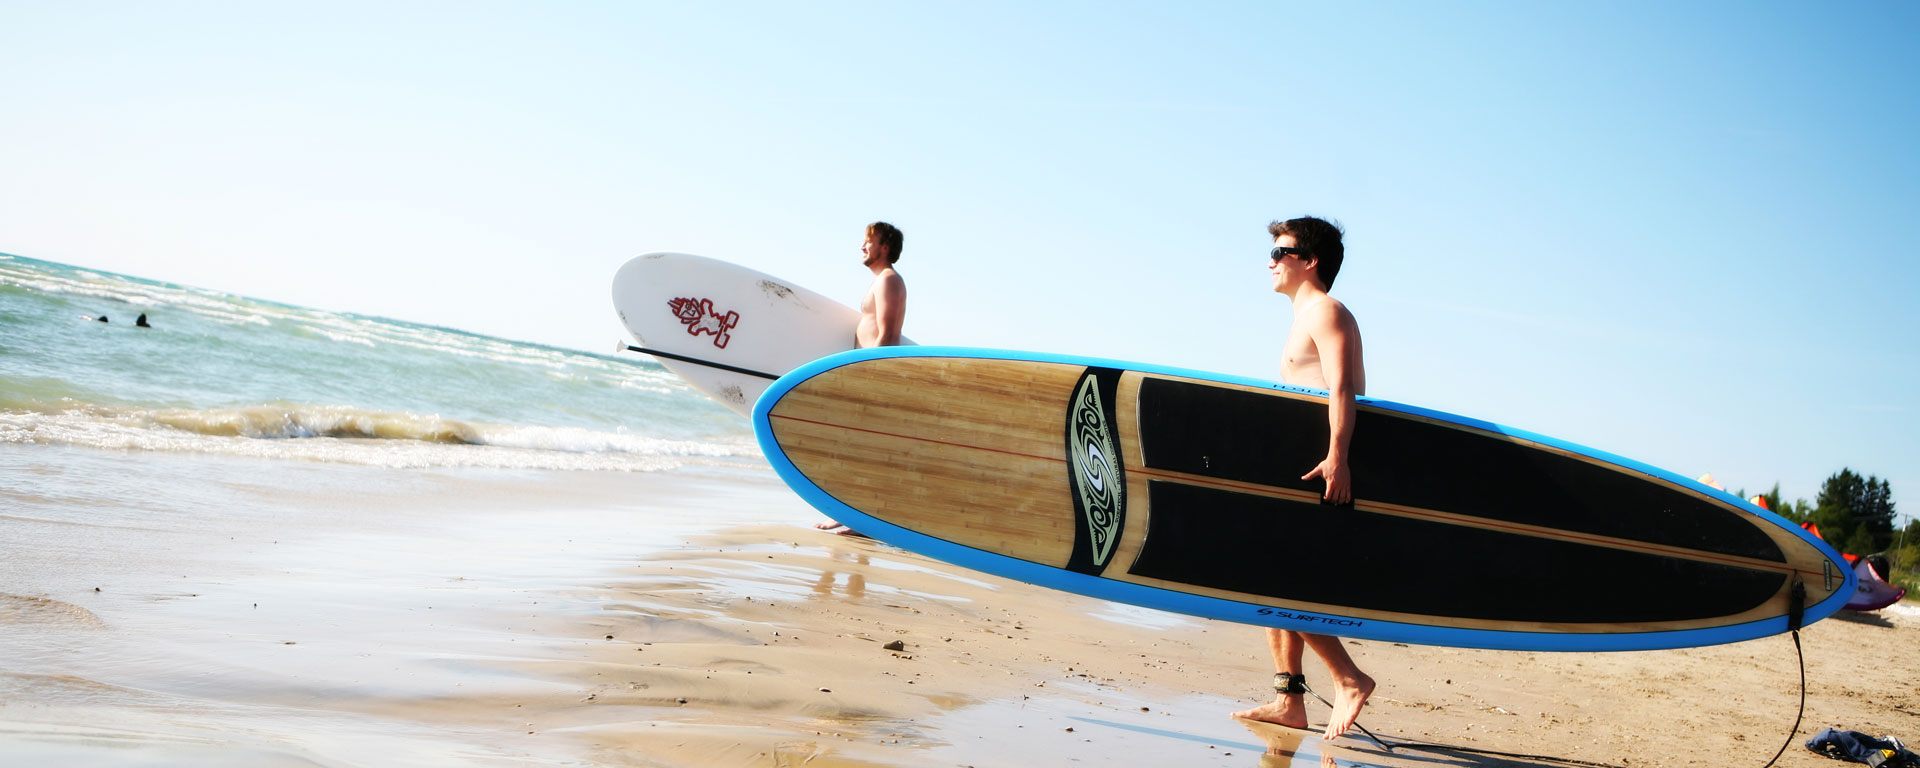 two young men holding surfboards standing on a beach looking towards the water